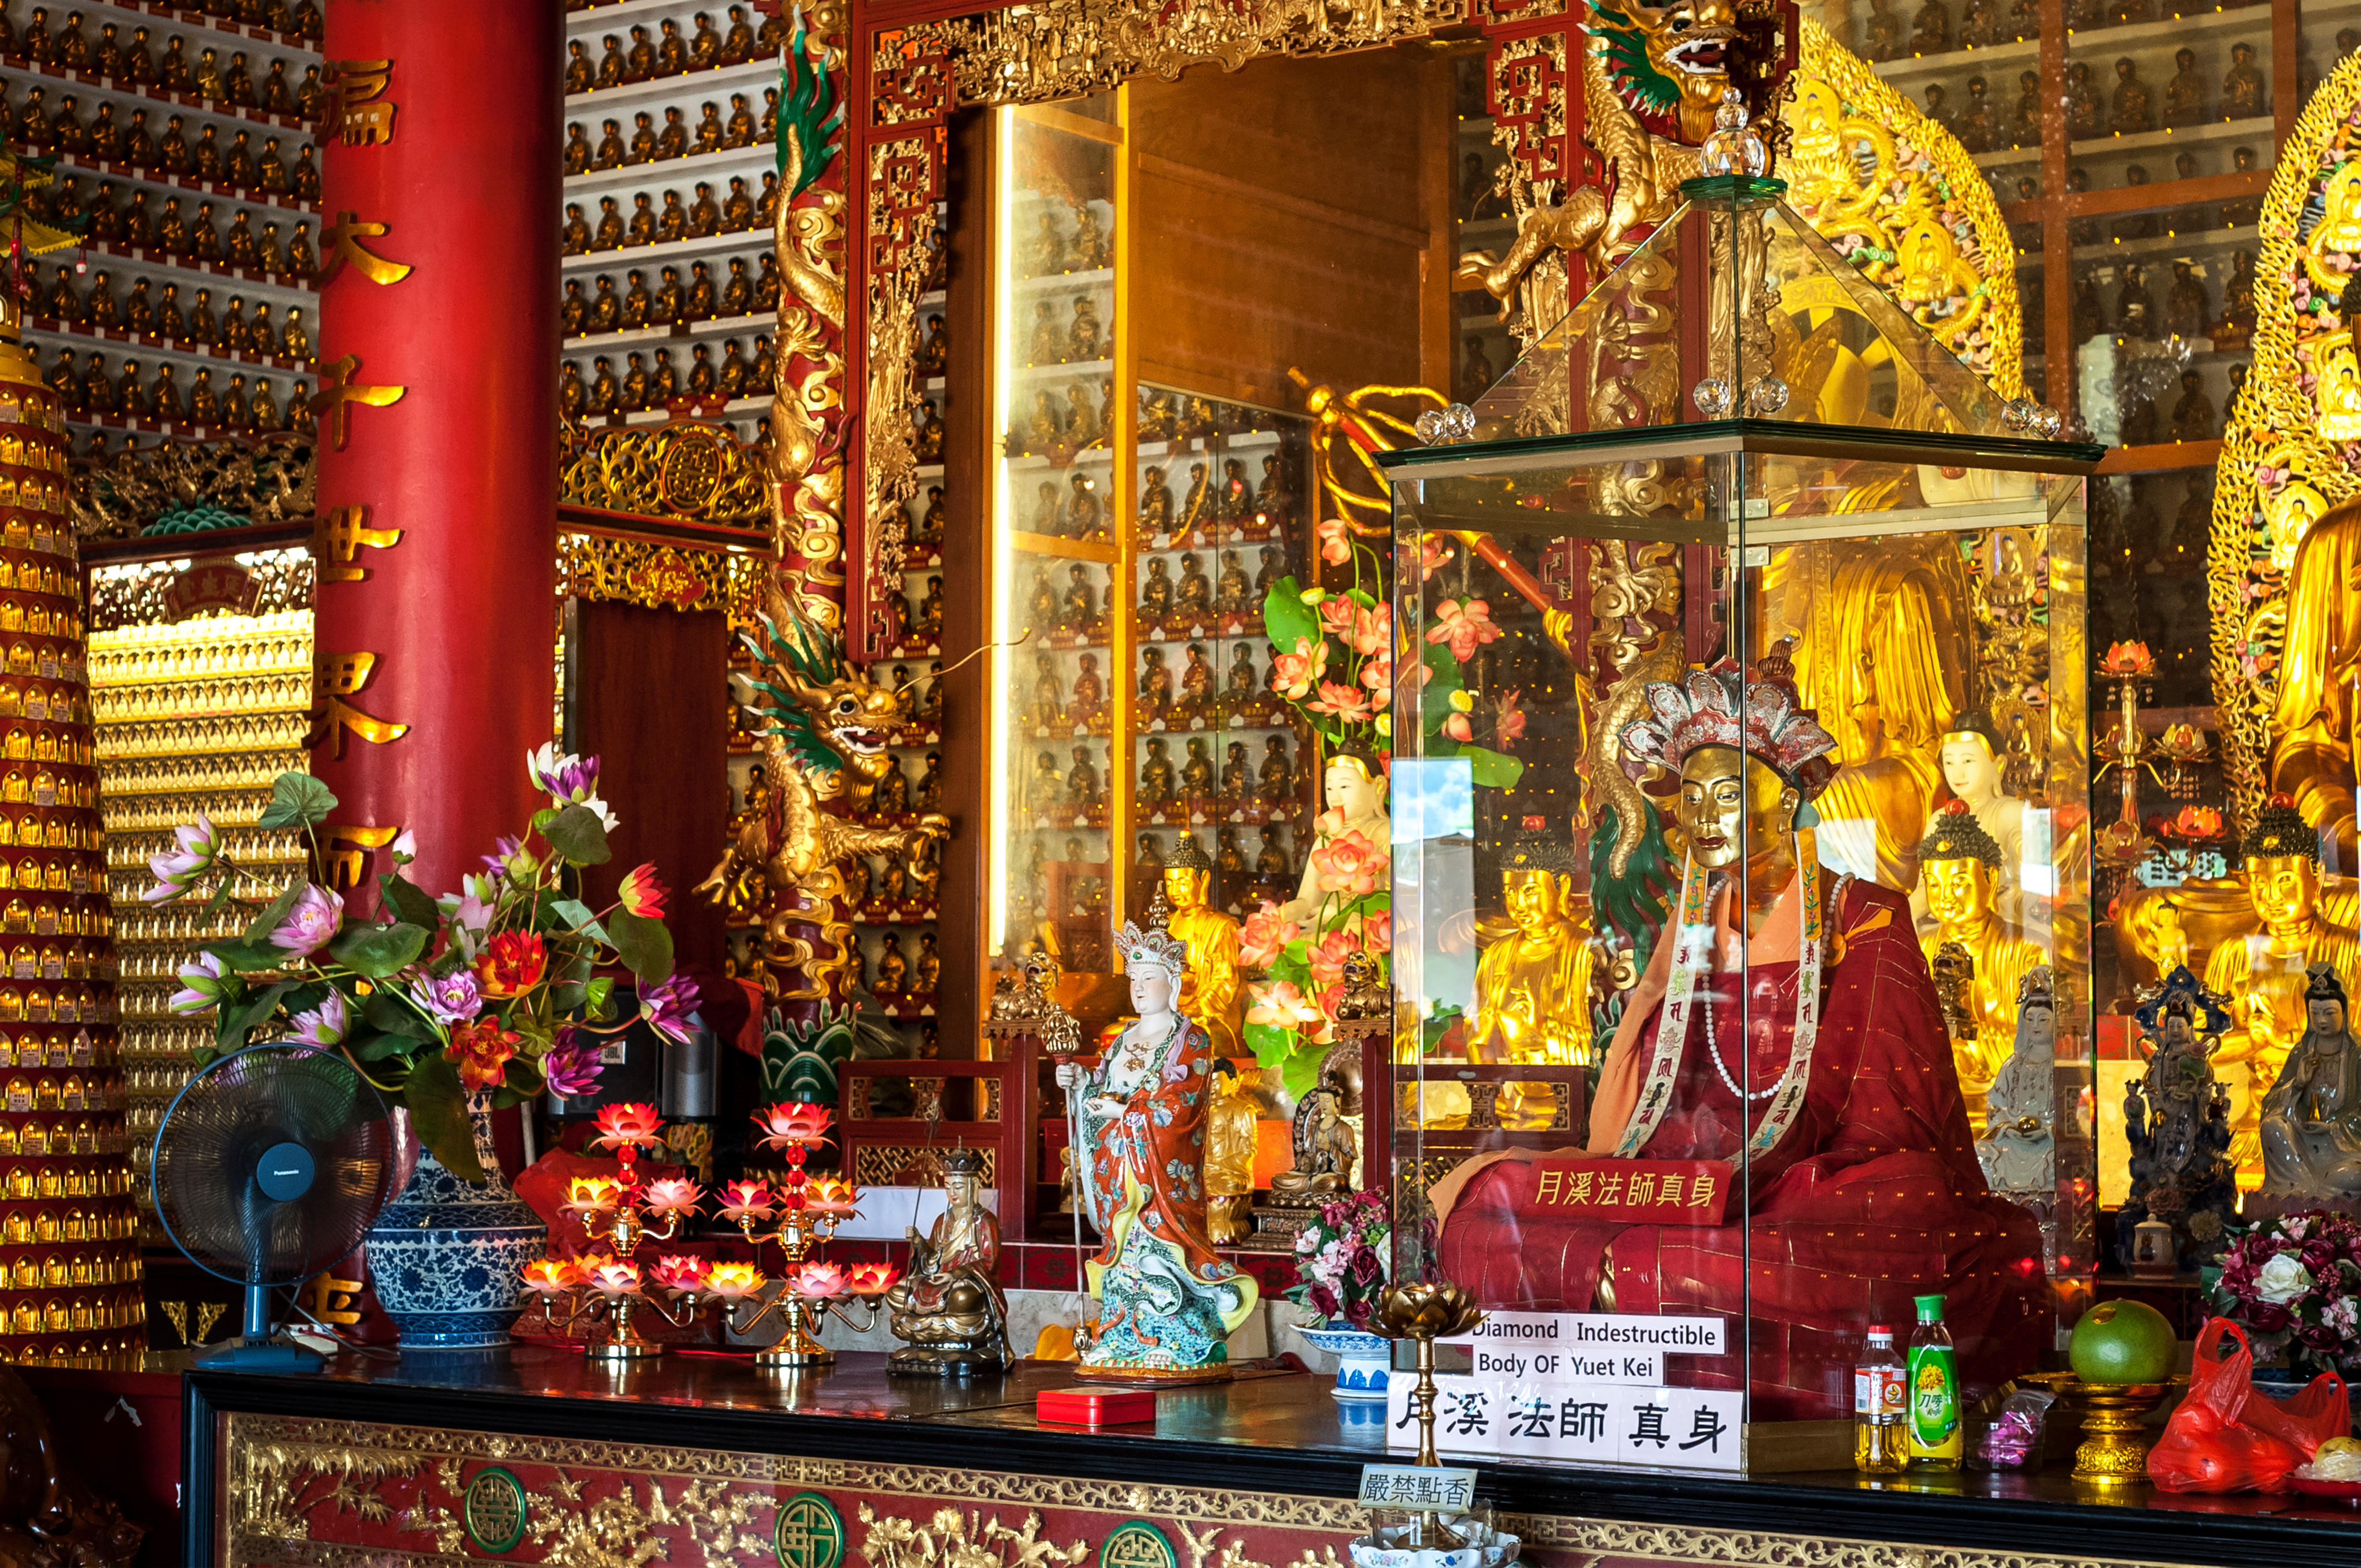 Ten Thousand Buddhas Monastery One of the Top Attractions in Hong